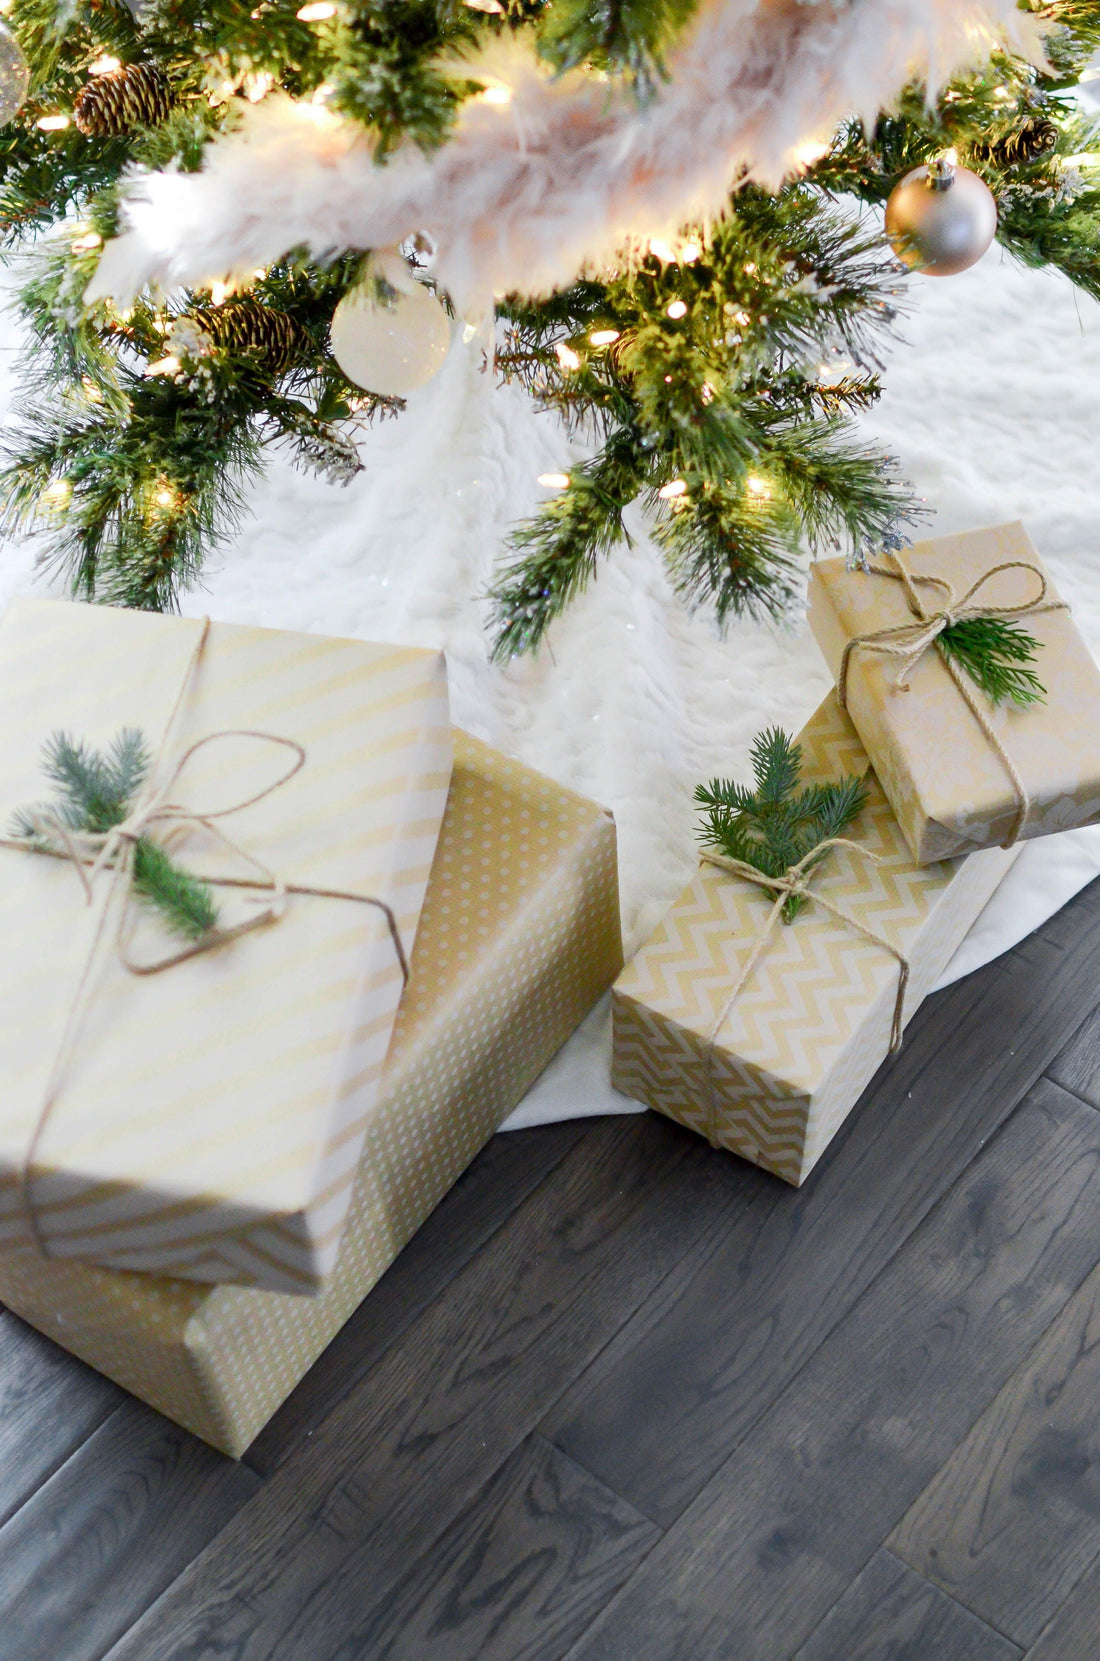 Green Gift Guide: Our Tips for a More Sustainable Holiday Shopping List